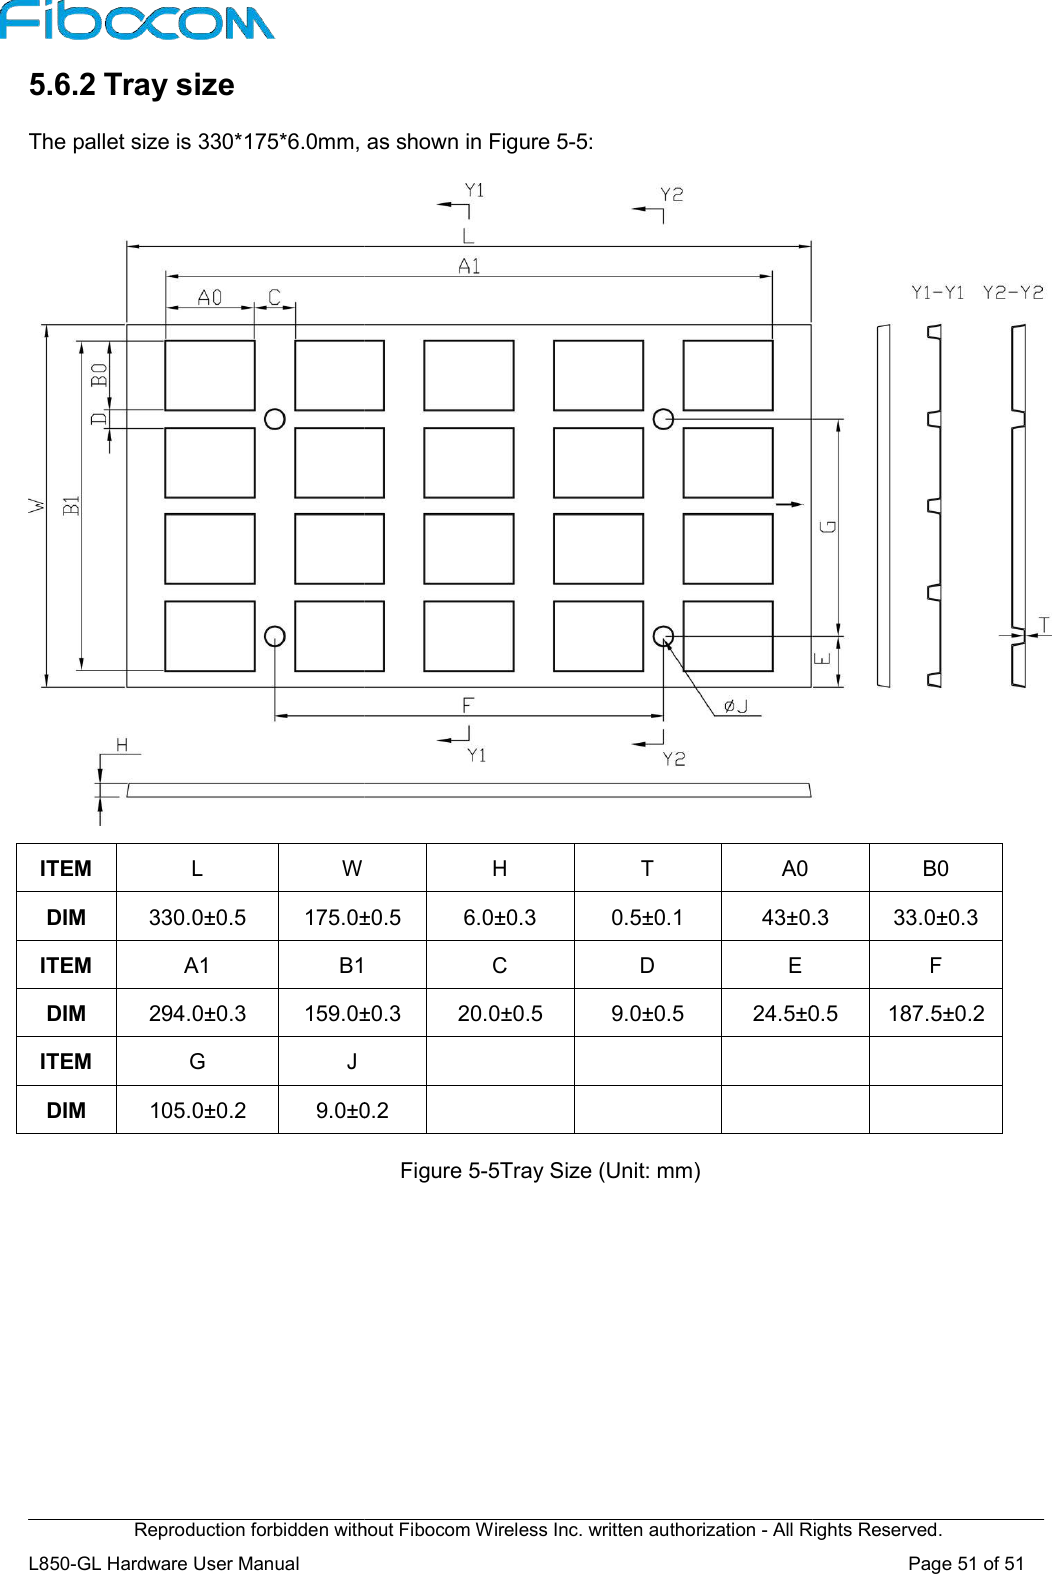 Reproduction forbidden without Fibocom Wireless Inc. written authorization L850-GL Hardware User Manual    5.6.2 Tray size The pallet size is 330*175*6.0mm, as shown in Figure 5  ITEM L W DIM  330.0±0.5 175.0±0.5ITEM  A1 B1DIM  294.0±0.3 159.0±0.3ITEM G J DIM  105.0±0.2 9.0±0.2 Reproduction forbidden without Fibocom Wireless Inc. written authorization - All Rights Reserved.pallet size is 330*175*6.0mm, as shown in Figure 5-5:  H T  A0 175.0±0.5  6.0±0.3  0.5±0.1 43±0.3B1 C D E 159.0±0.3  20.0±0.5  9.0±0.5 24.5±0.5      9.0±0.2      Figure 5-5Tray Size (Unit: mm) All Rights Reserved. Page 51 of 51  B0 43±0.3  33.0±0.3  F 24.5±0.5  187.5±0.2   